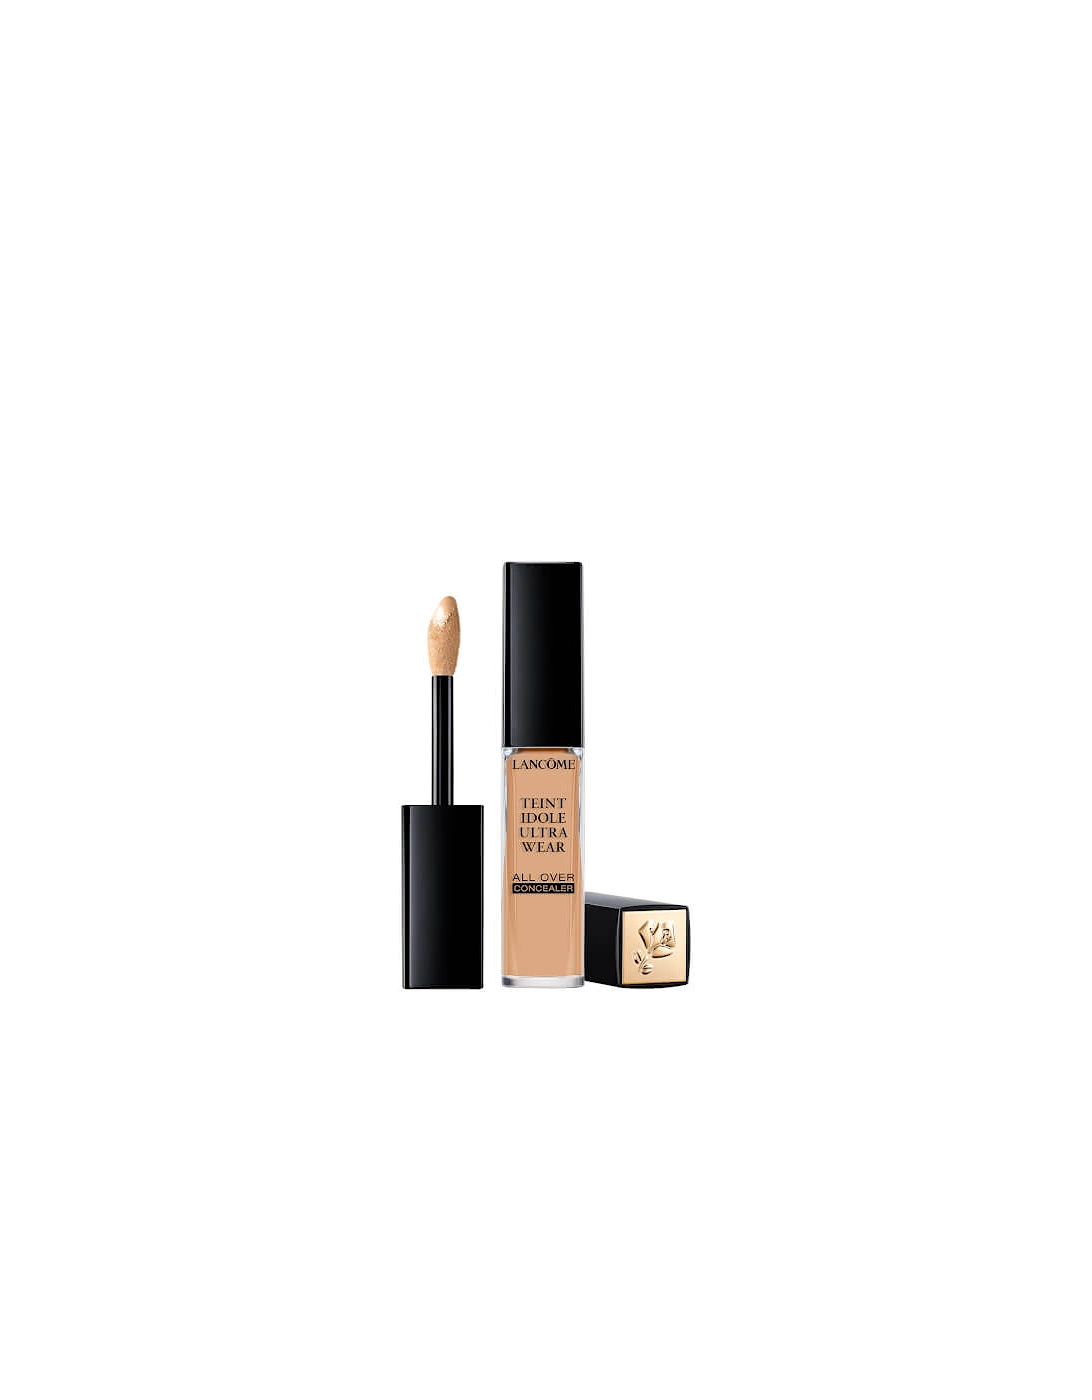 Teint Idole Ultra Wear All Over Concealer - 04 Beige Nature, 2 of 1